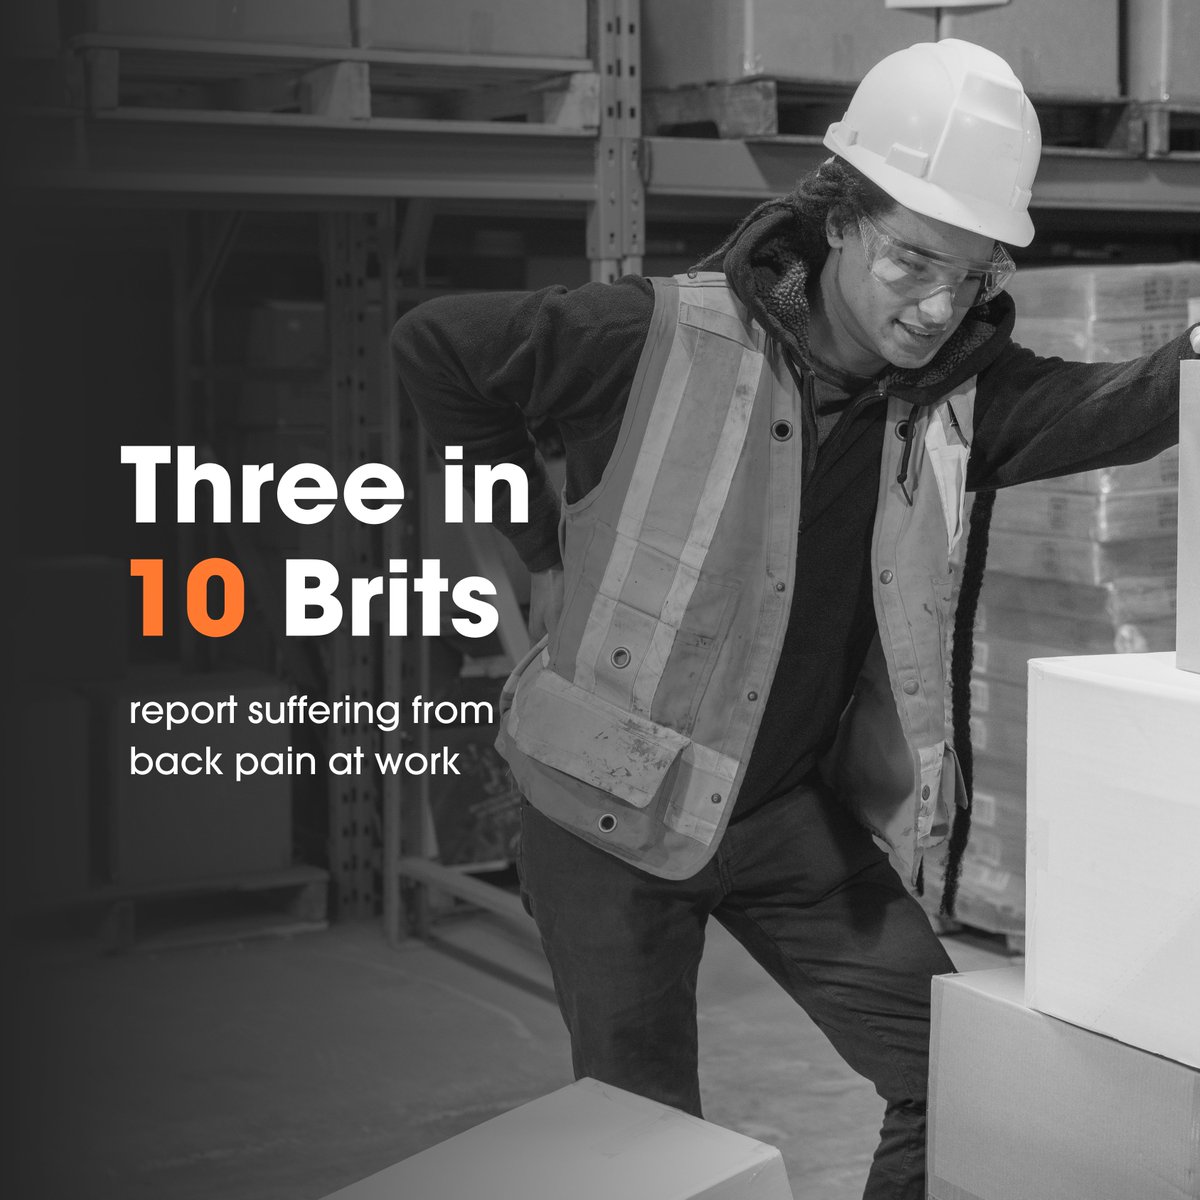 Given that 27% of people in the UK experience work-related back pain, relying on the traditional notion of maintaining a stiff upper lip is no longer a practical solution. Now is the time for employers to step up and have their employees backs – literally!